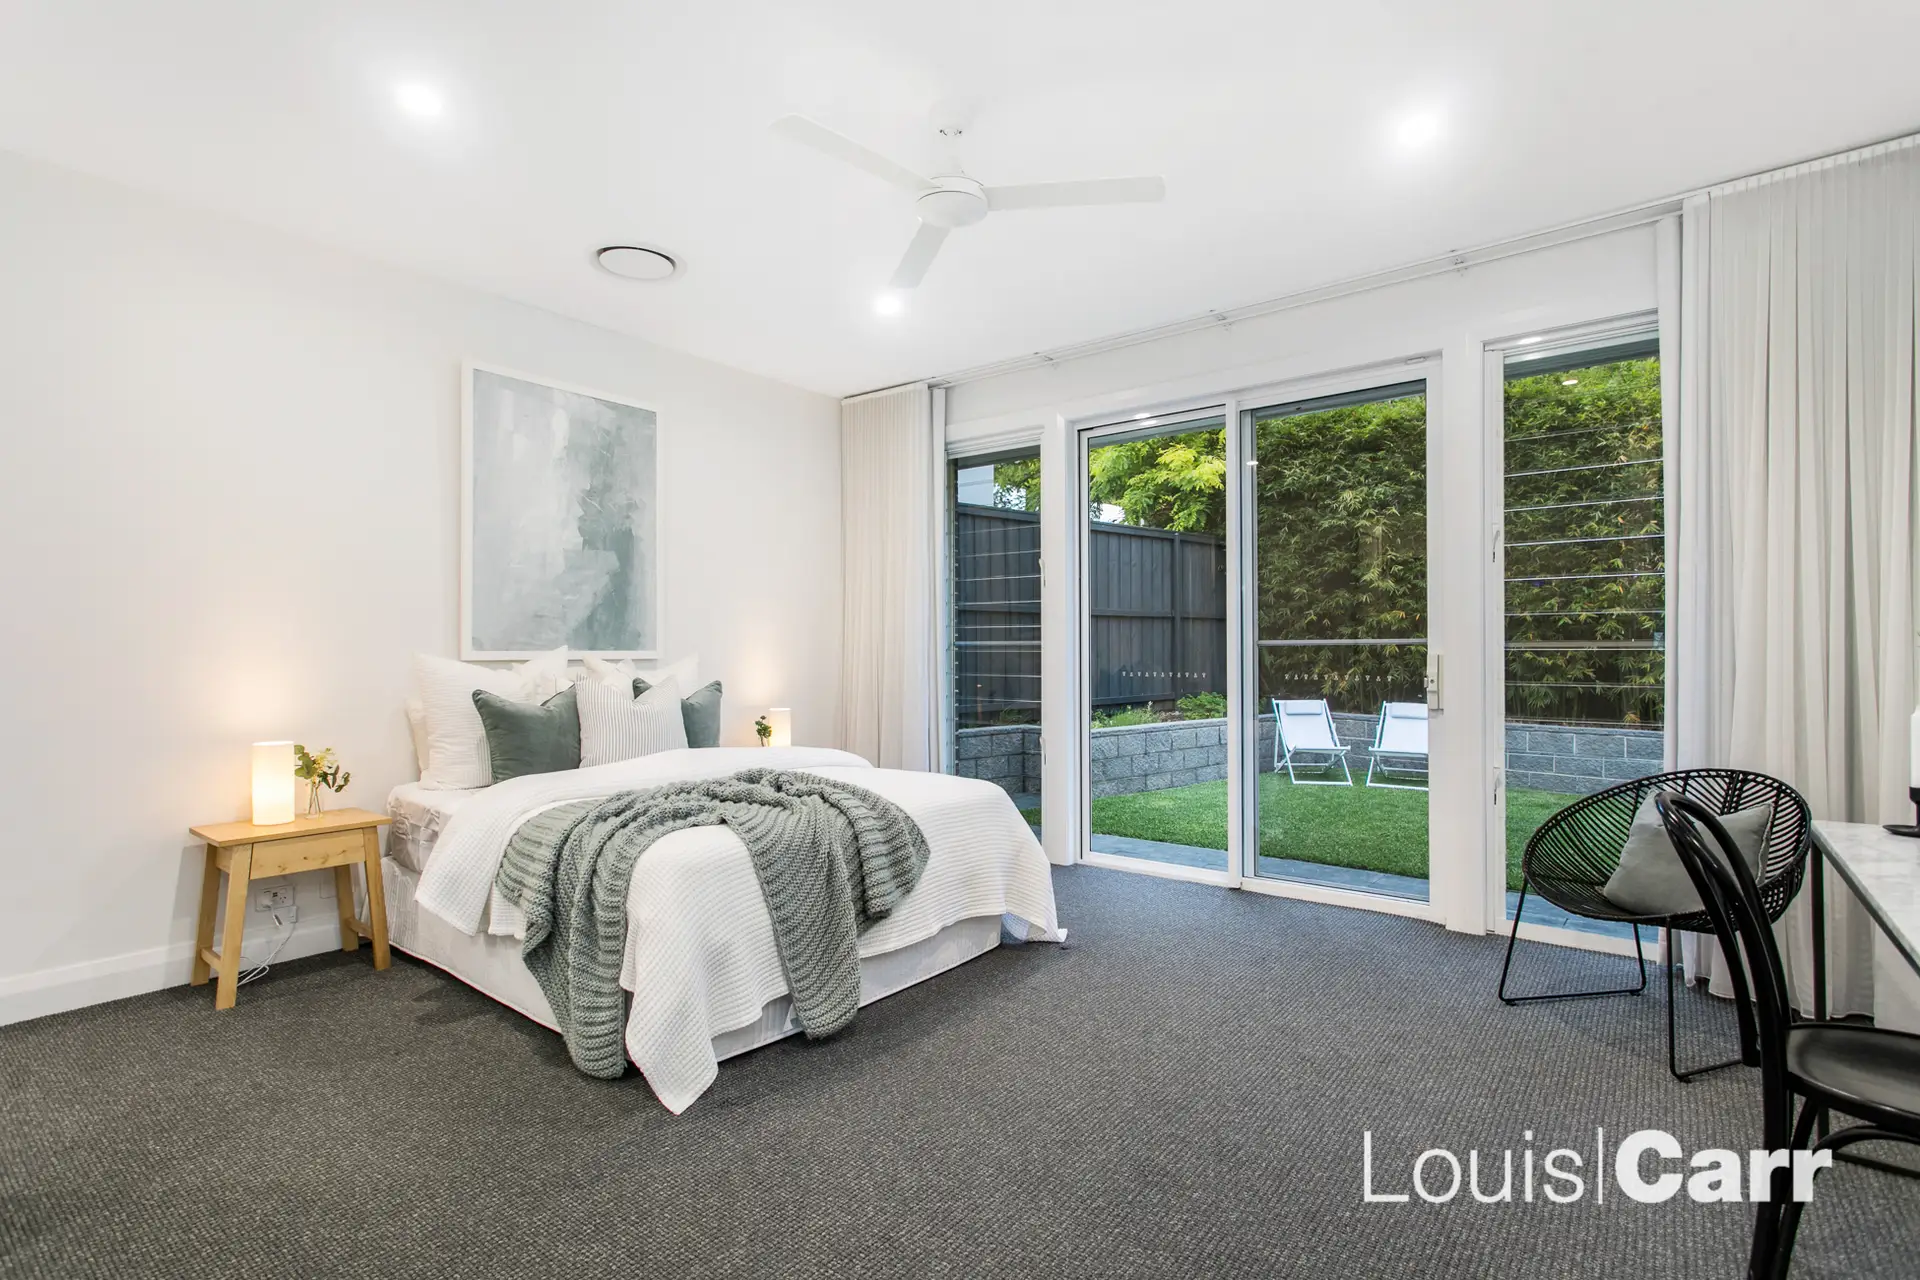 Photo #8: 2a Salisbury Downs Drive, West Pennant Hills - Sold by Louis Carr Real Estate